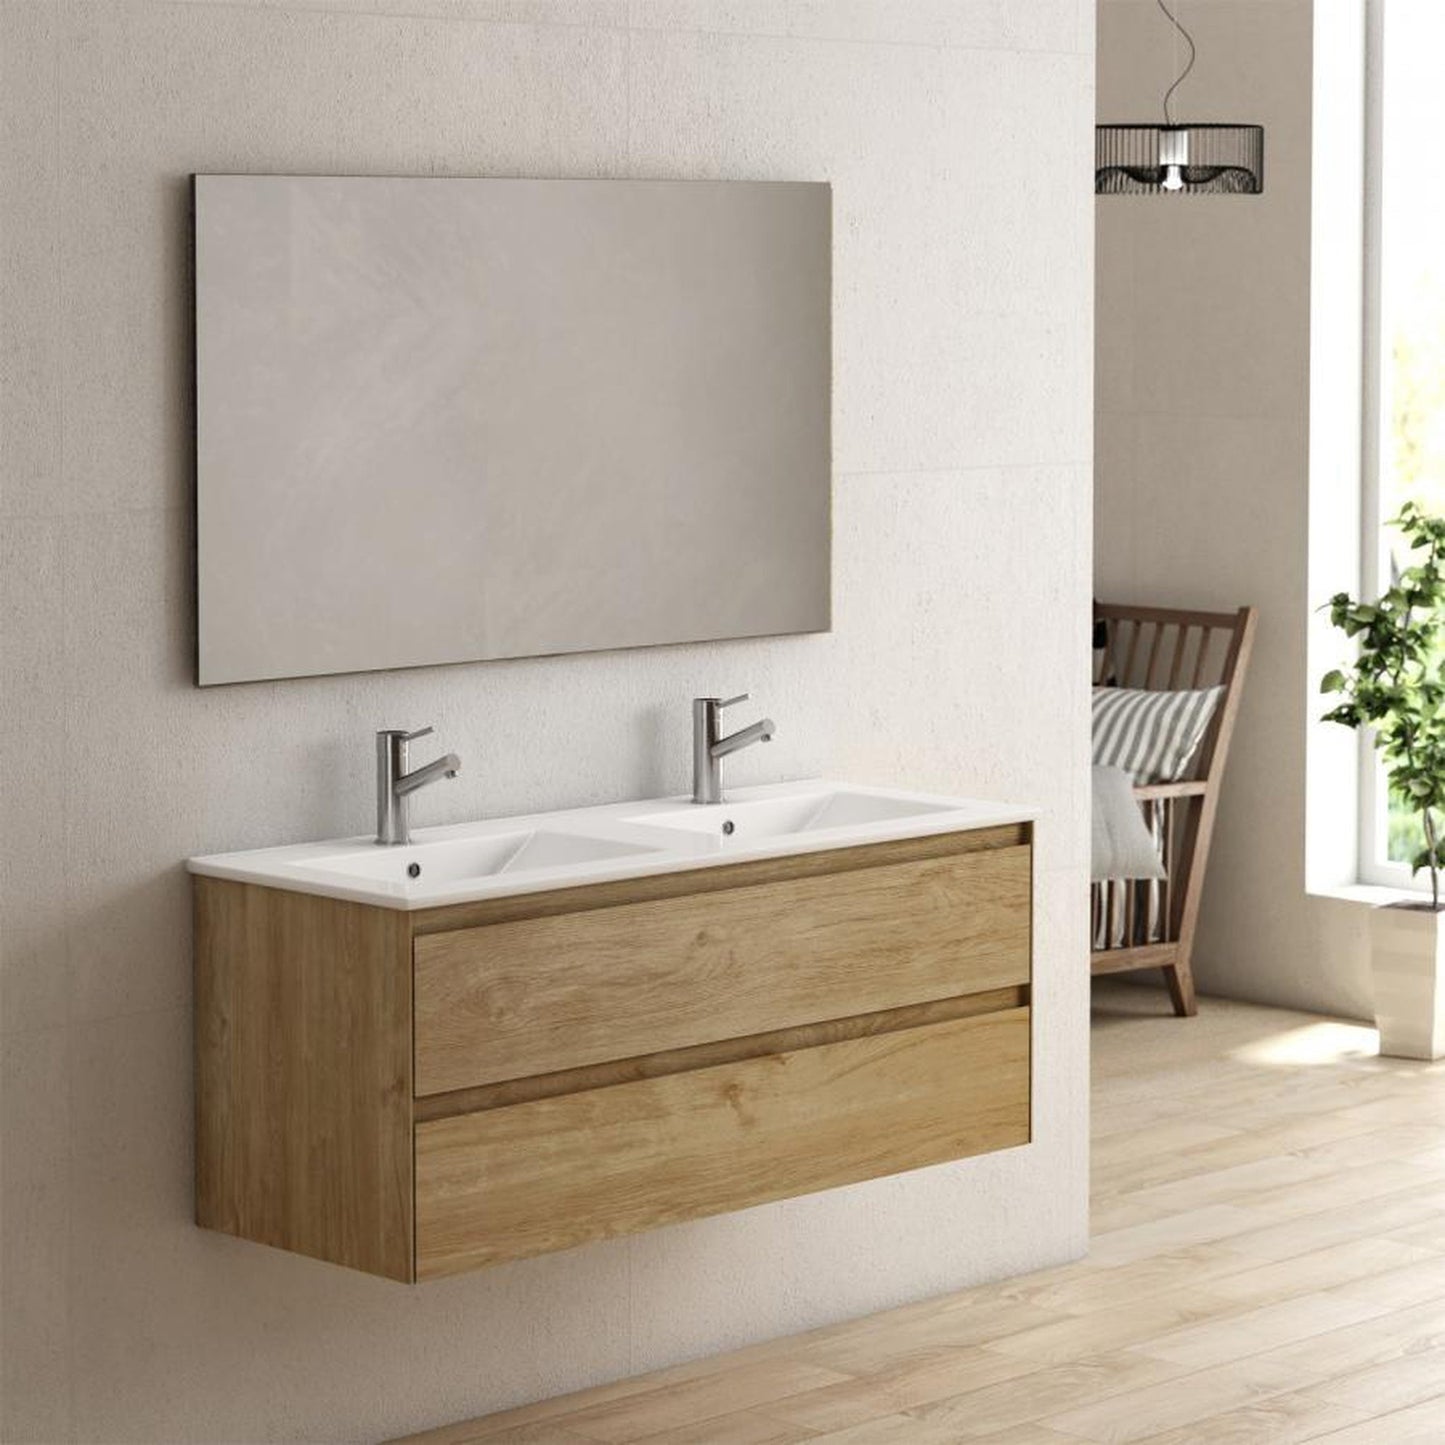 Eviva Bloom 48" x 34" Natural Oak Wall-Mounted Bathroom Vanity With White Double Integrated Porcelain Sink